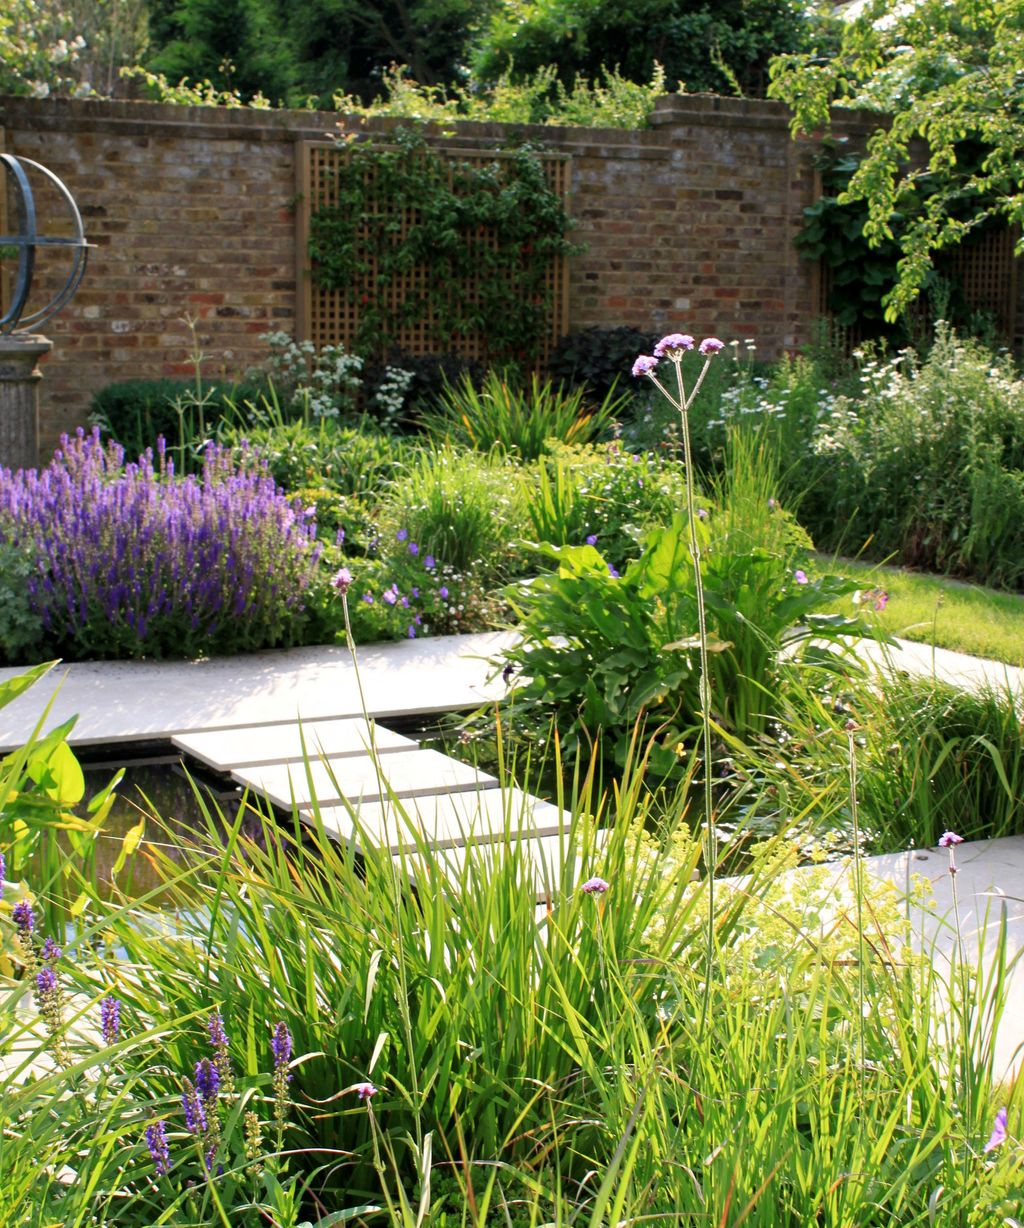 5 ideas for walled backyards to inspire from this small urban plot